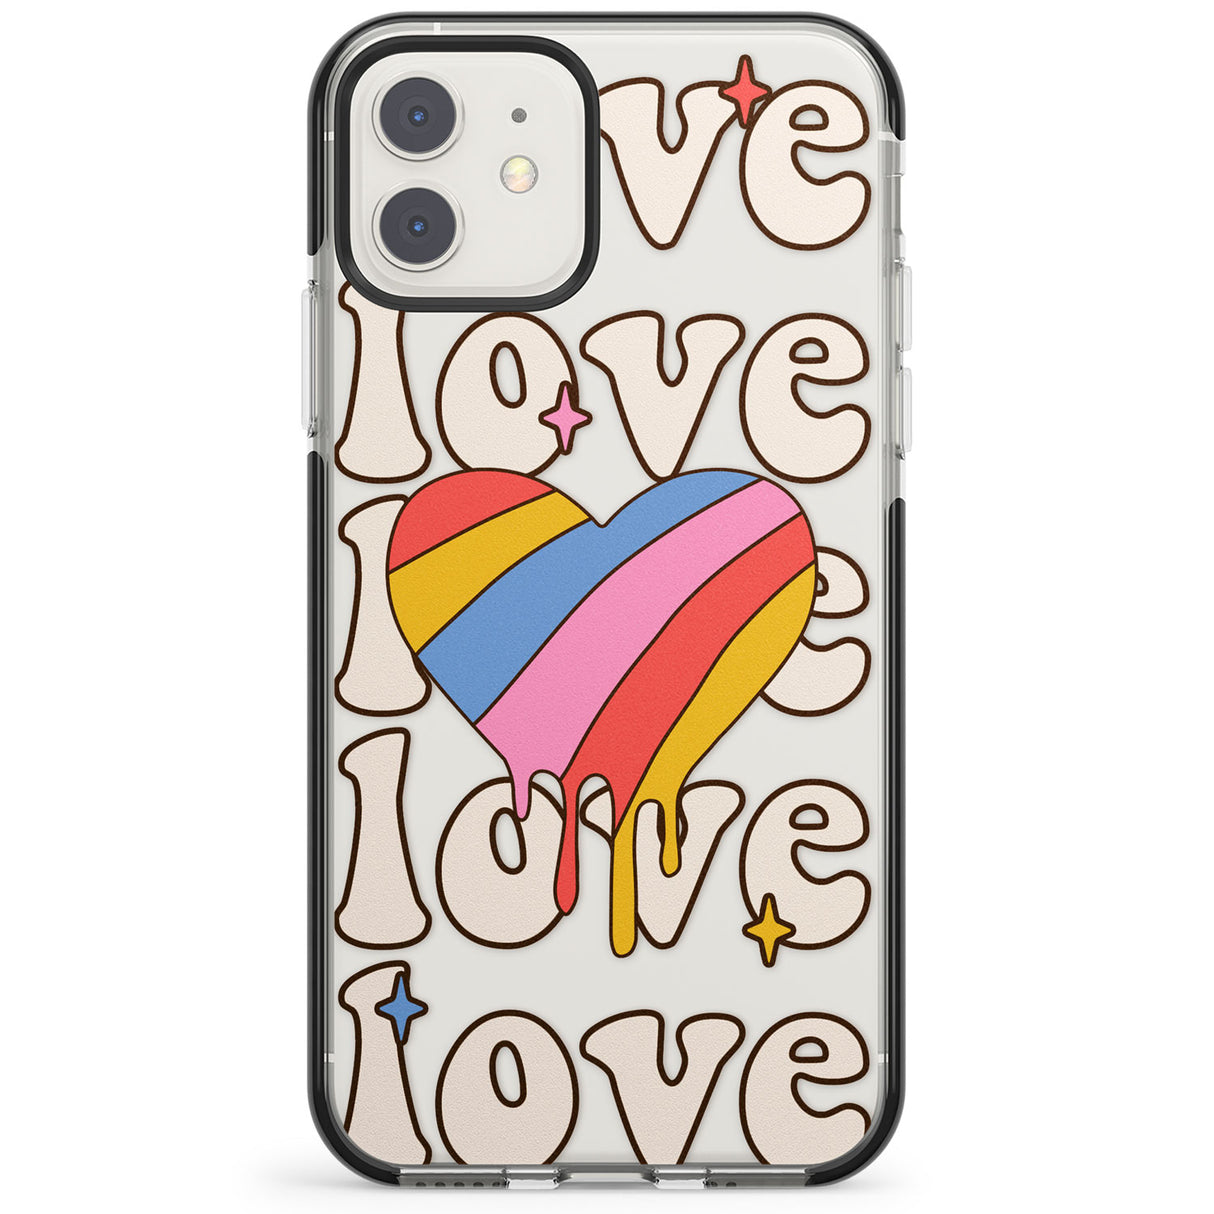 Groovy Love Impact Phone Case for iPhone 11, iphone 12